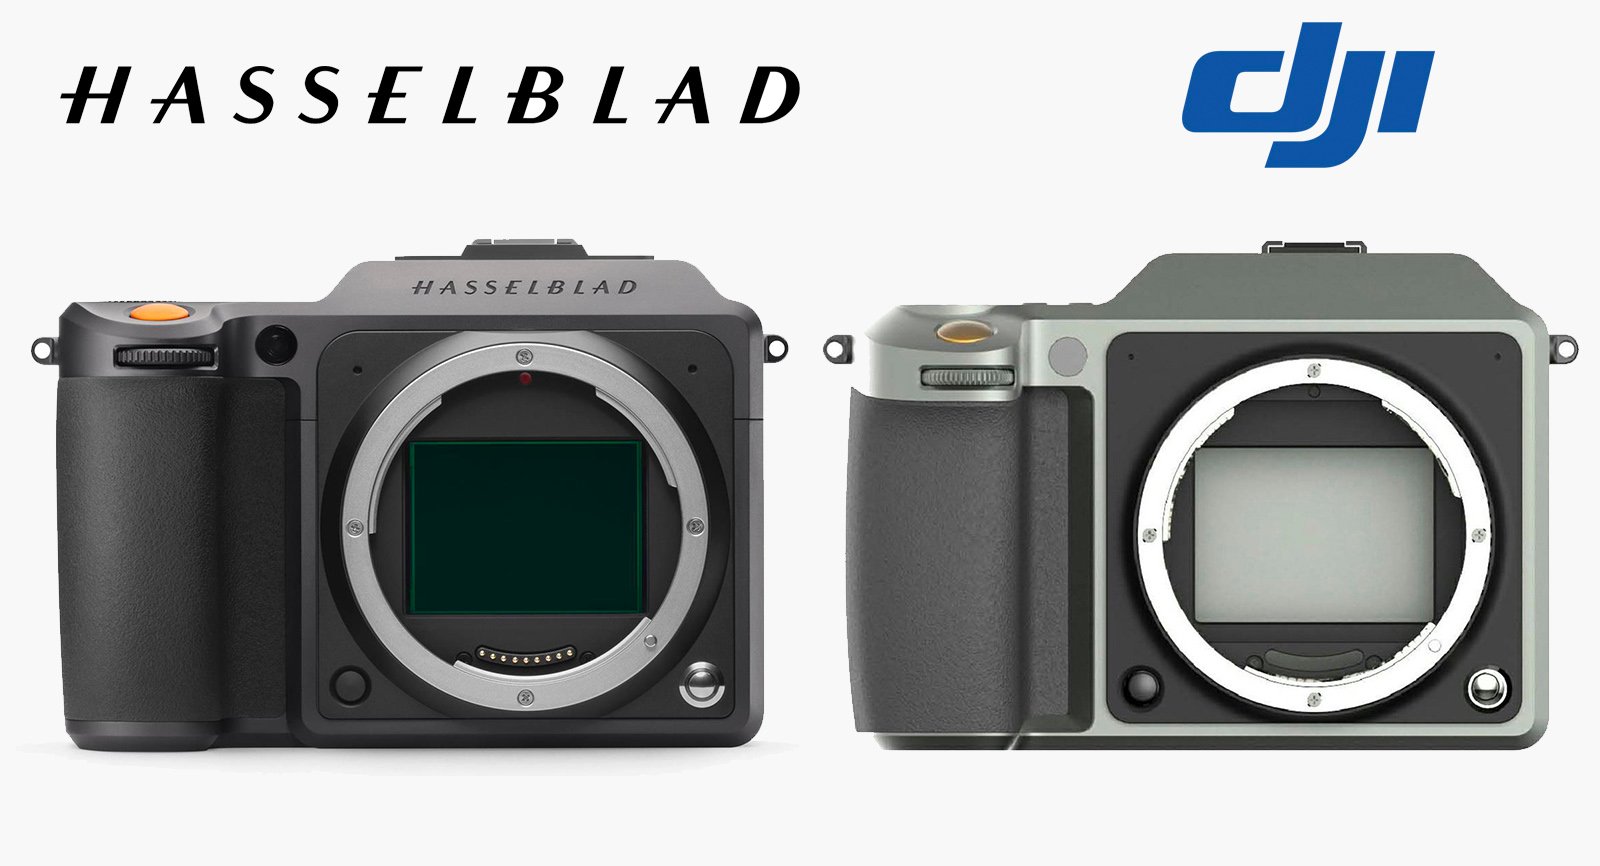 Patent Shows DJI is Working on a Clone of the Hasselblad X1D